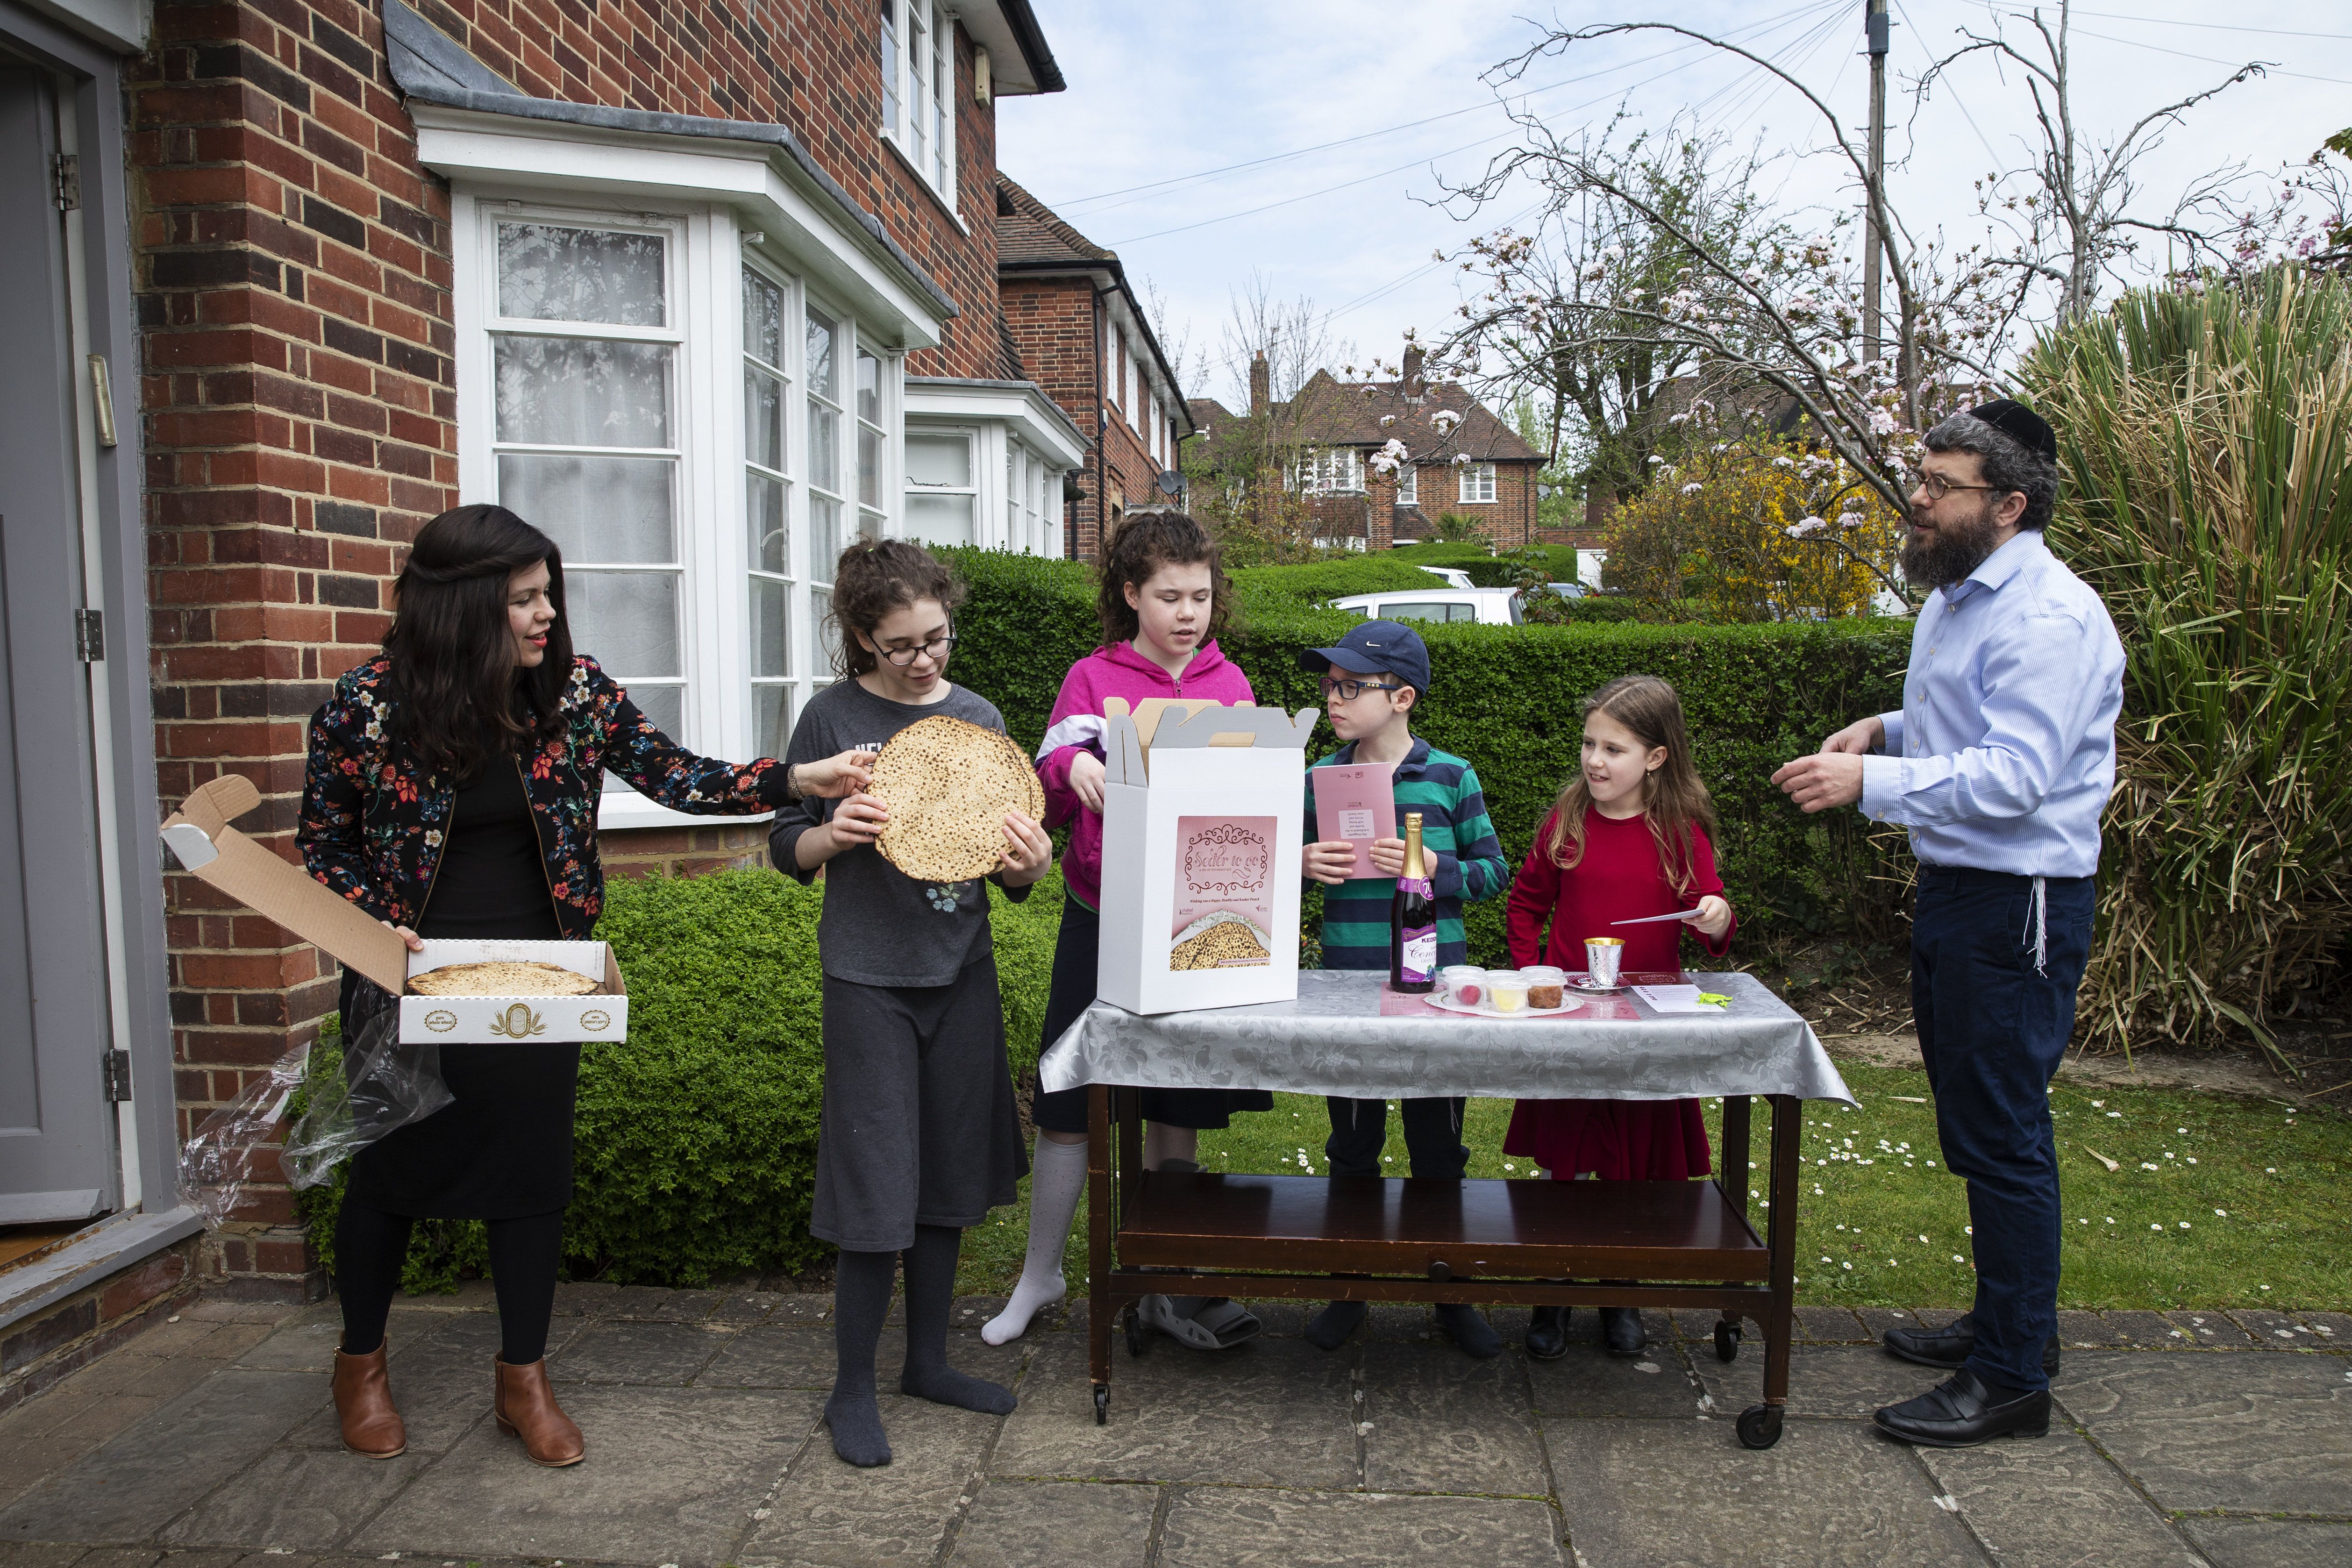 In this image, kids and adults hold food at a small table outside a house